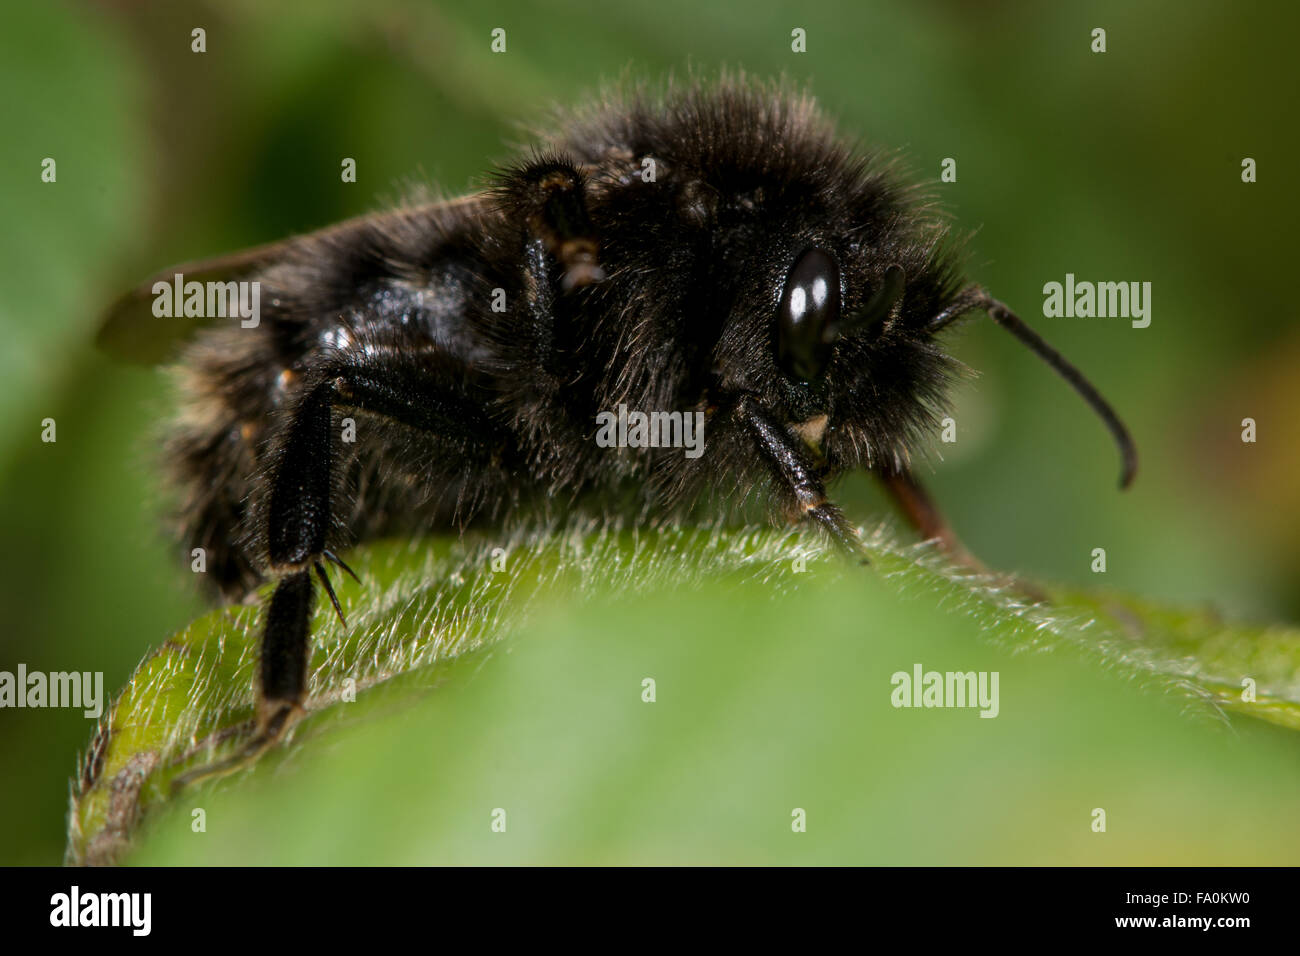 Field cuckoo bee (Bombus campestris). An all black form of this nest parasite bumblebee at rest on a leaf Stock Photo